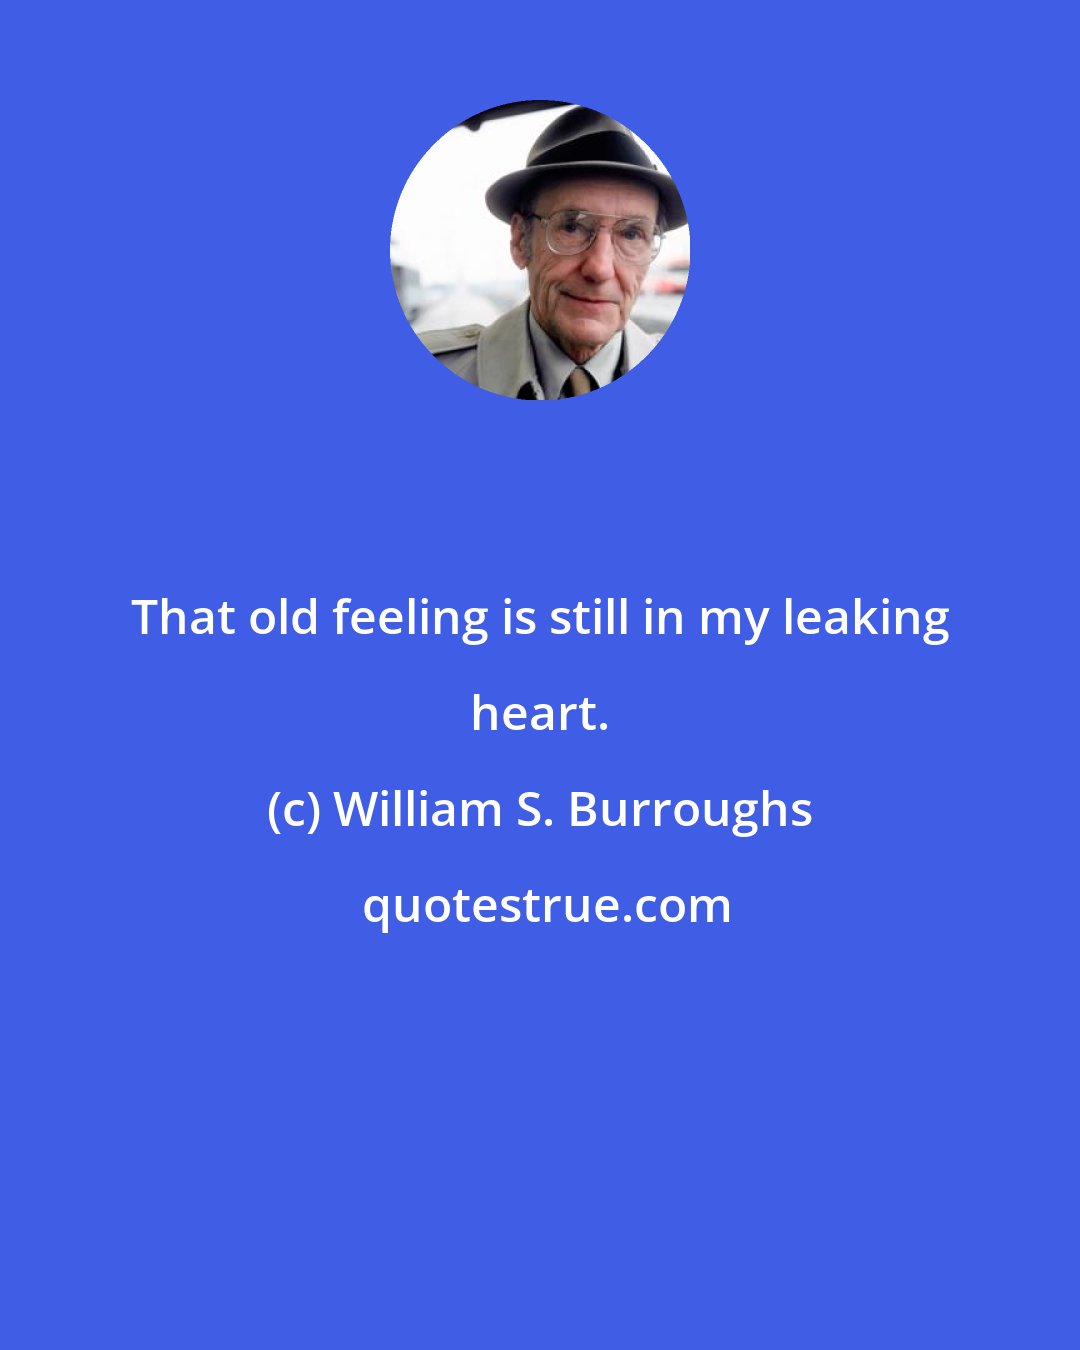 William S. Burroughs: That old feeling is still in my leaking heart.